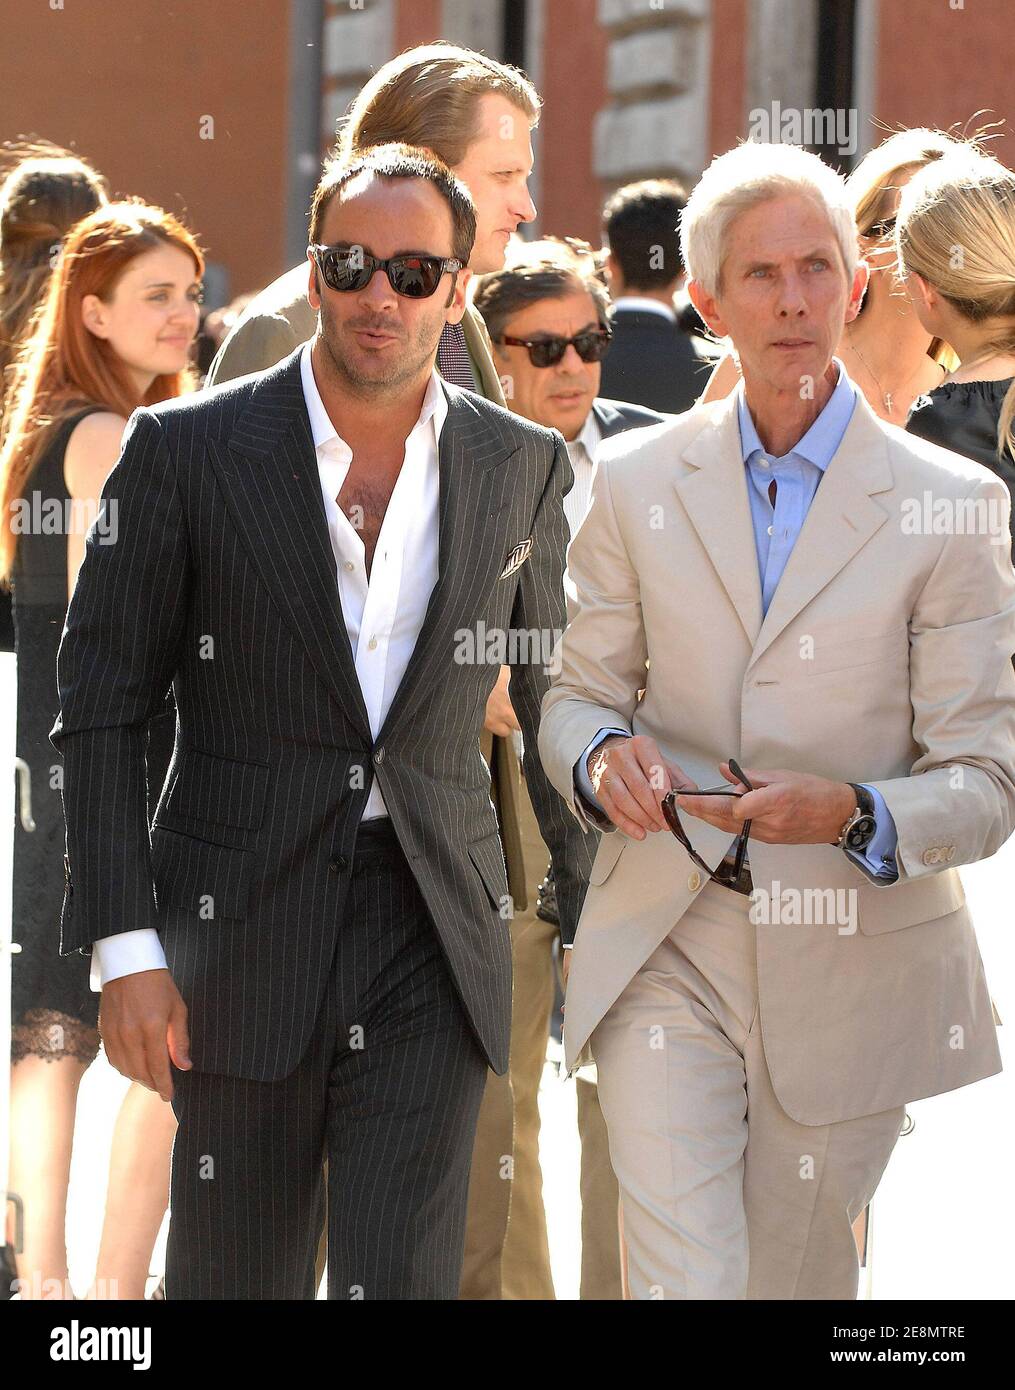 Tom Ford (L) and Richard Buckley arriving for the Valentino 2007-2008 Fall  Winter Haute Couture collection show, as part of the Valentino fashion  house's 45th anniversary celebrations, held at 1 Via Santo